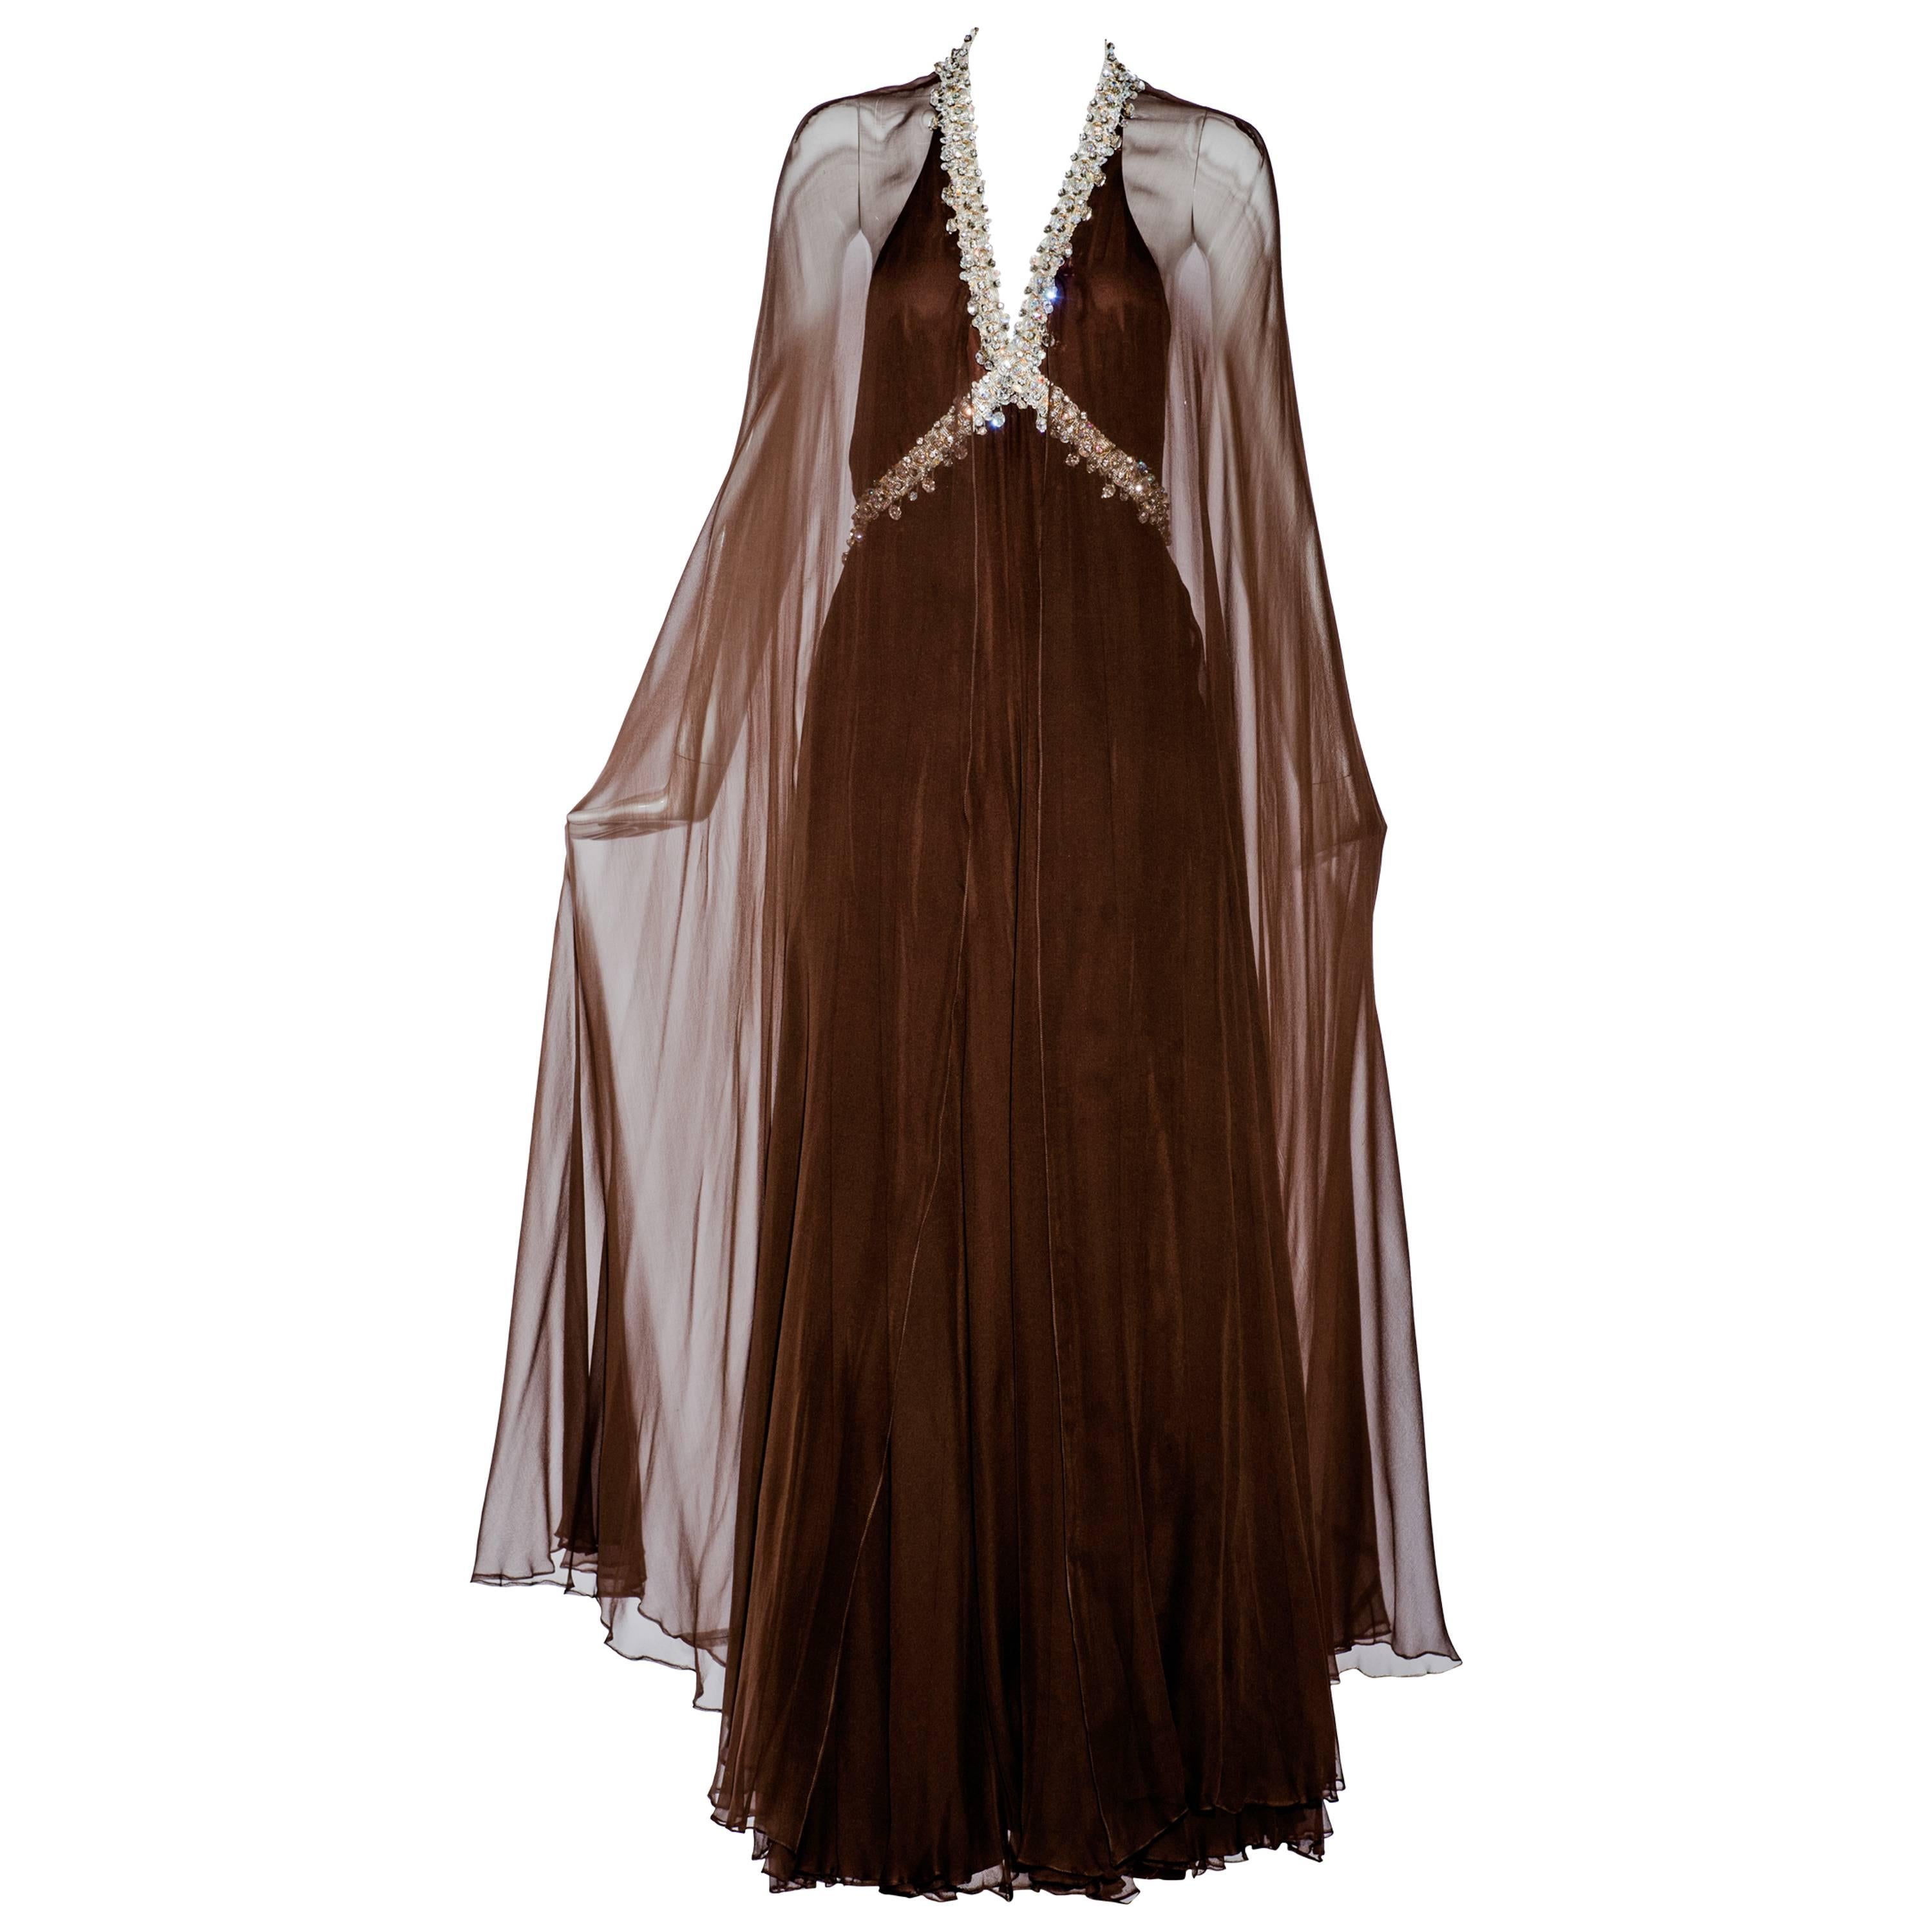 Vintage 1970s brown silk chiffon sheer cape gown with jeweled neckline